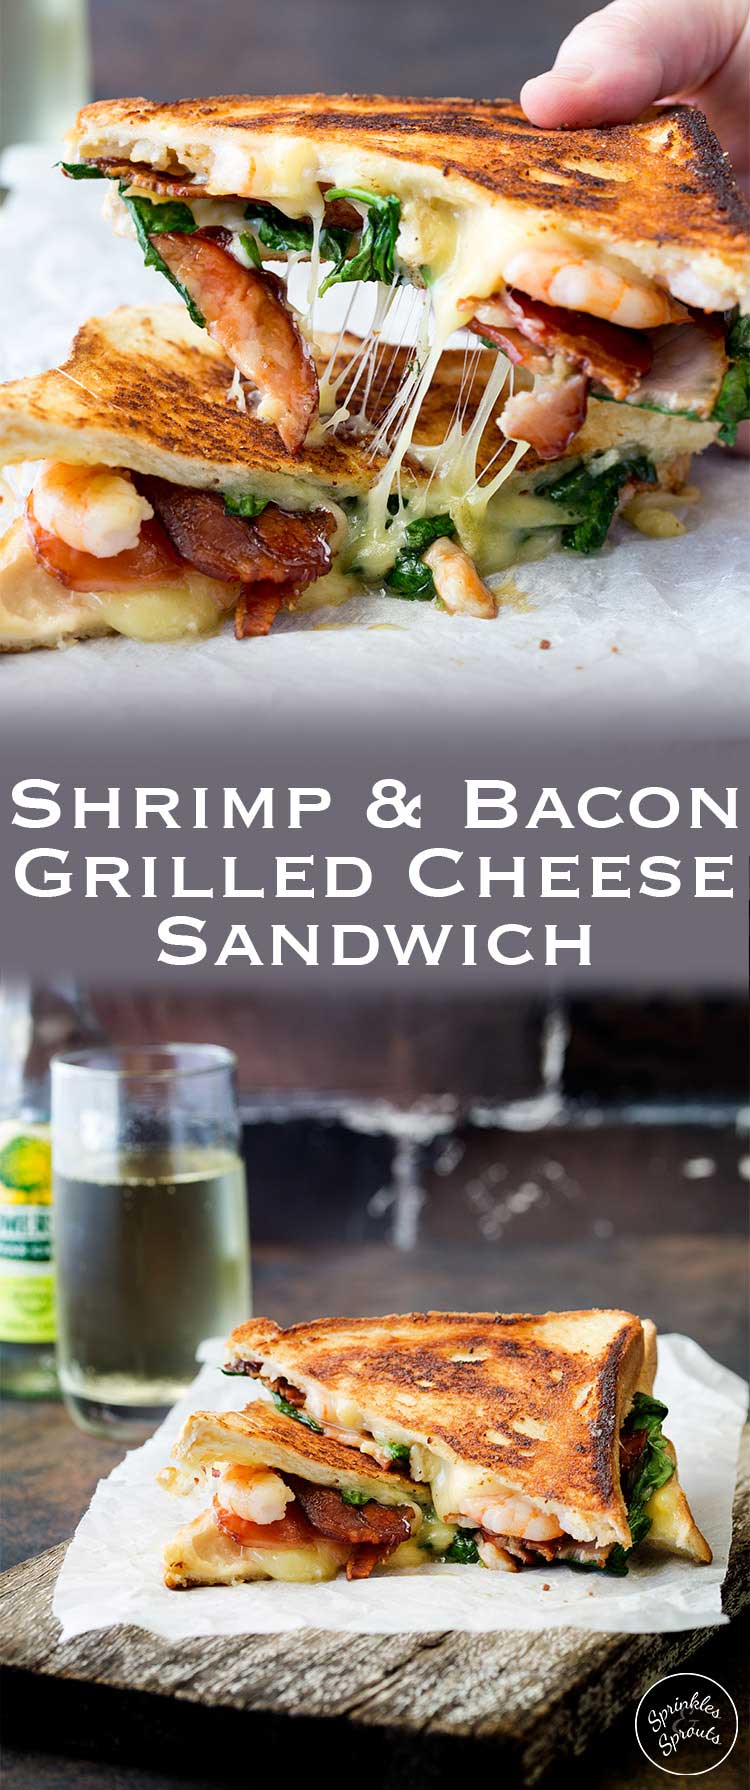 Is there anything more comforting that a grilled cheese sandwich??? And this shrimp and bacon grilled cheese sandwich takes the humble grilled cheese up a level! #SundaySupper This is a gourmet grilled cheese sandwich!